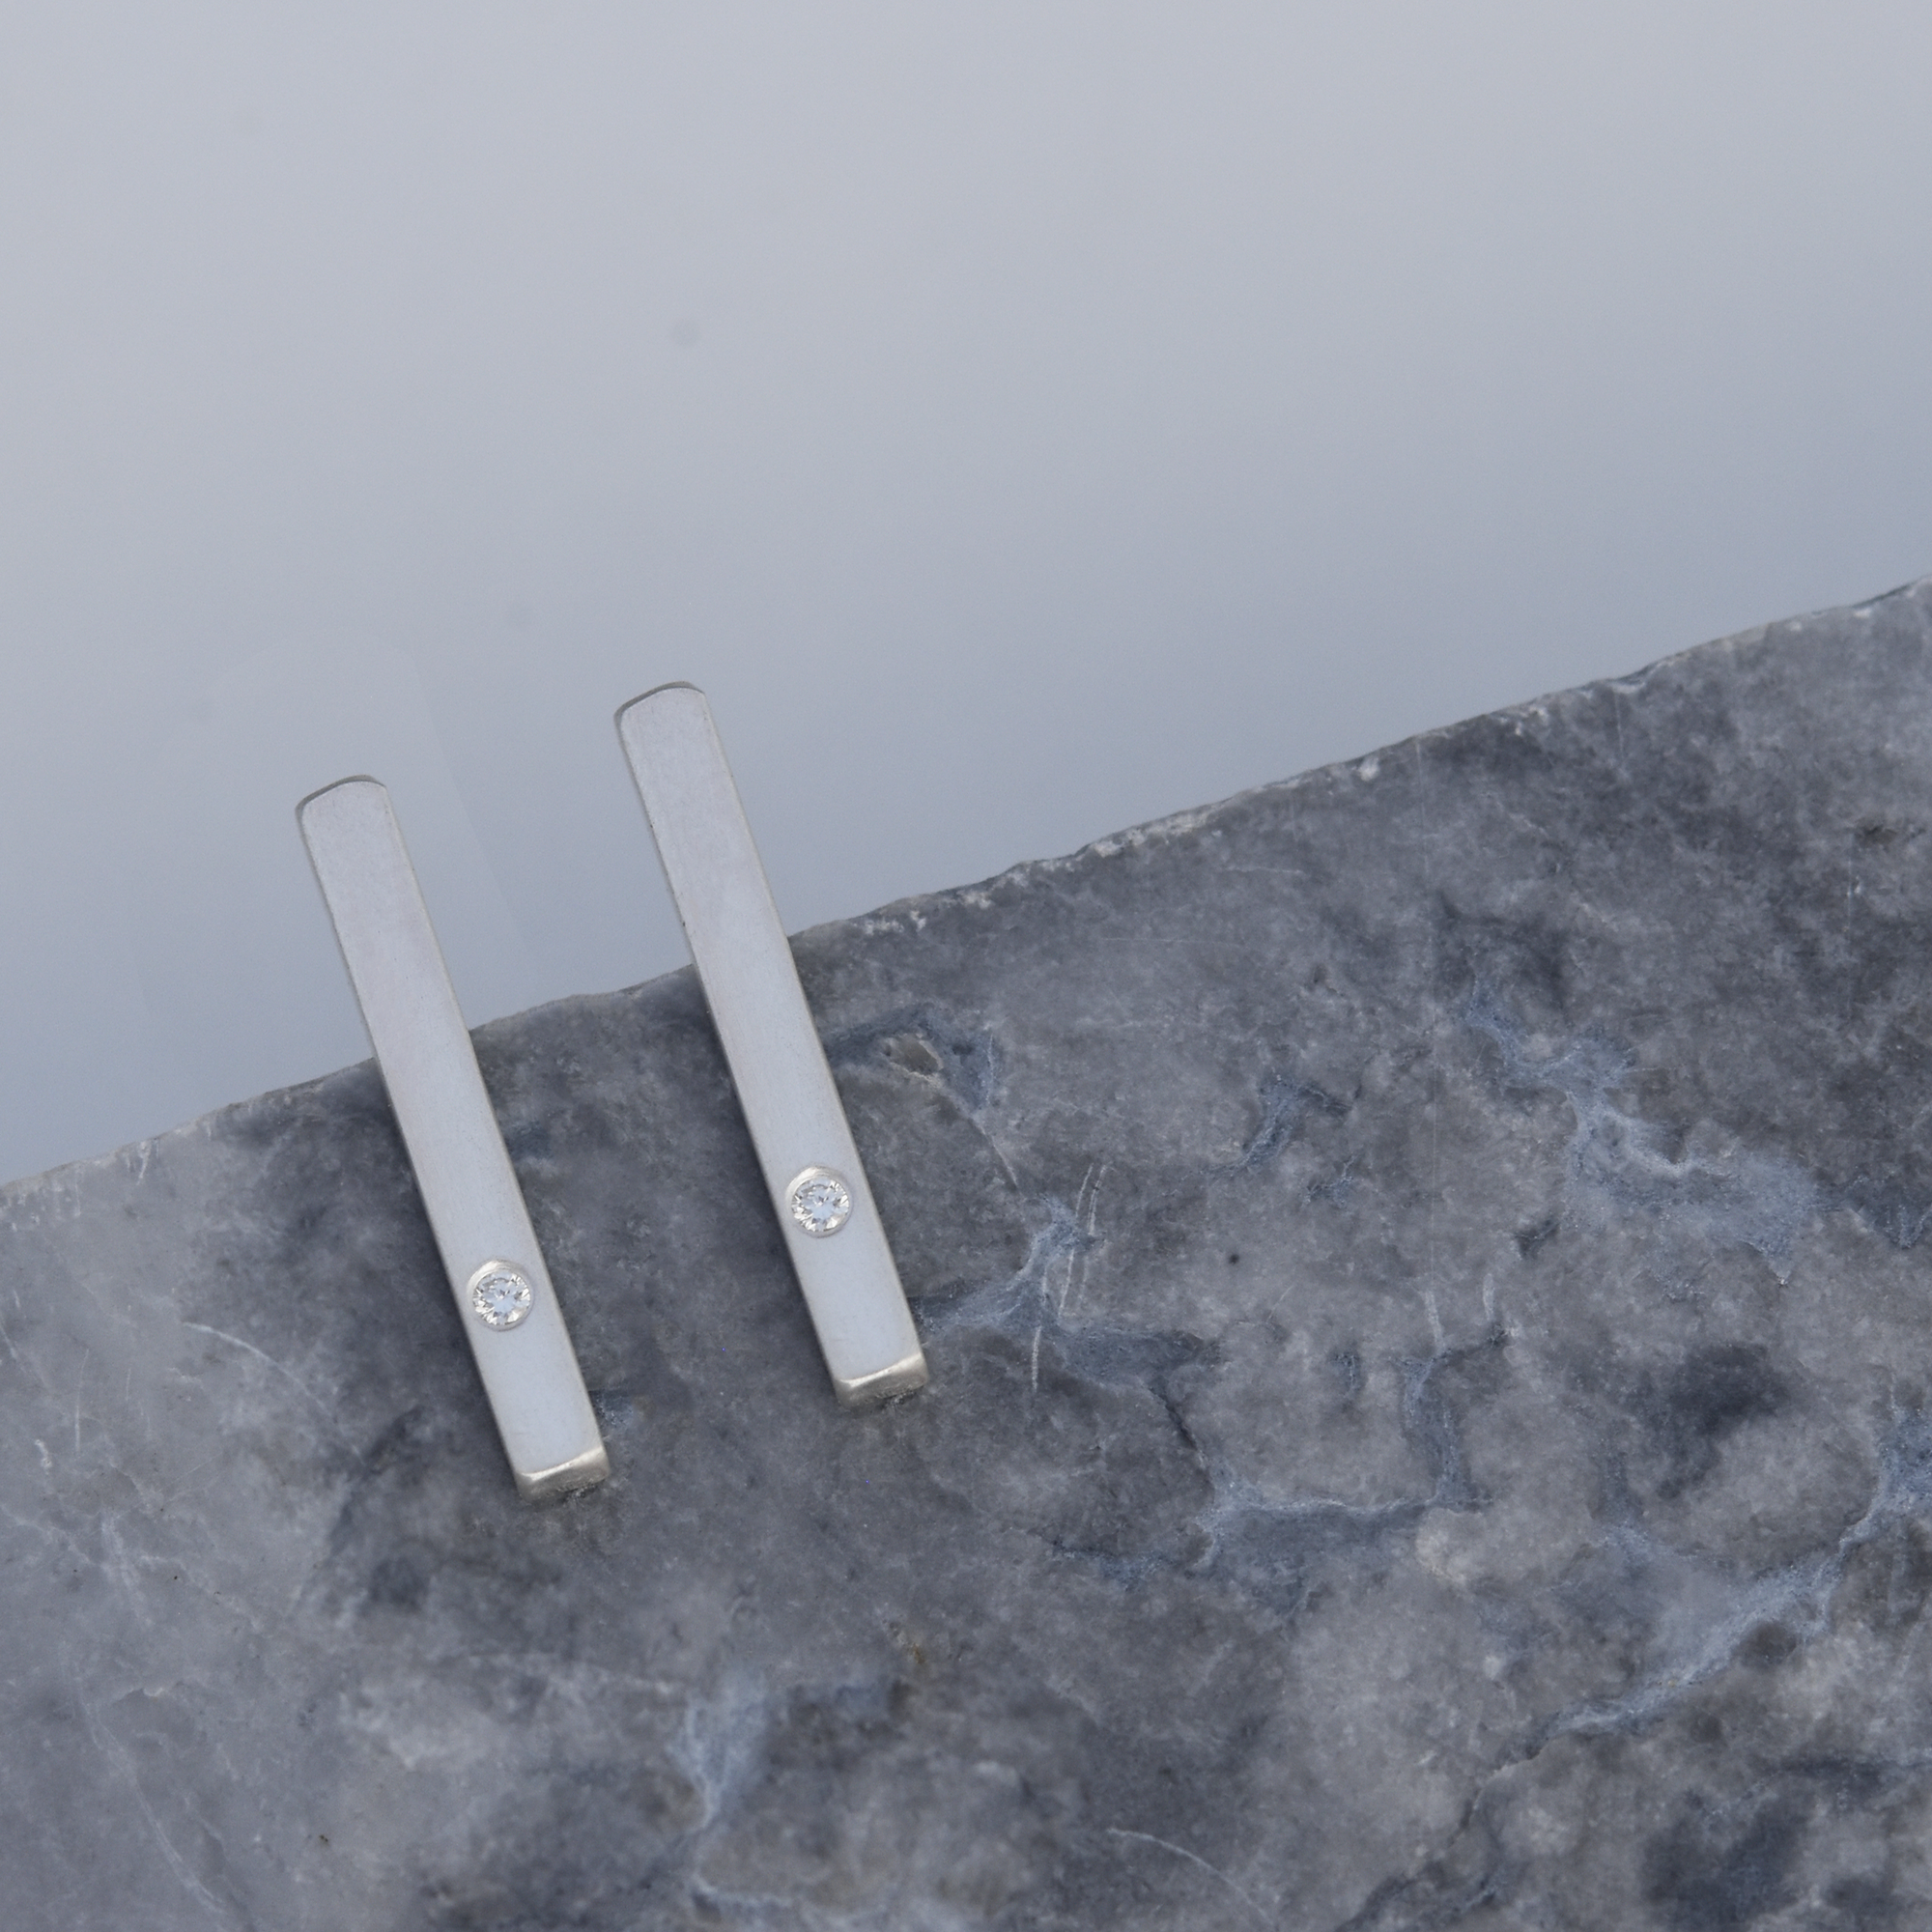 Inch long square wire sterling silver bar stud earrings with a 2mm diamond set toward the bottom of the bar for a little bit of sparkle!